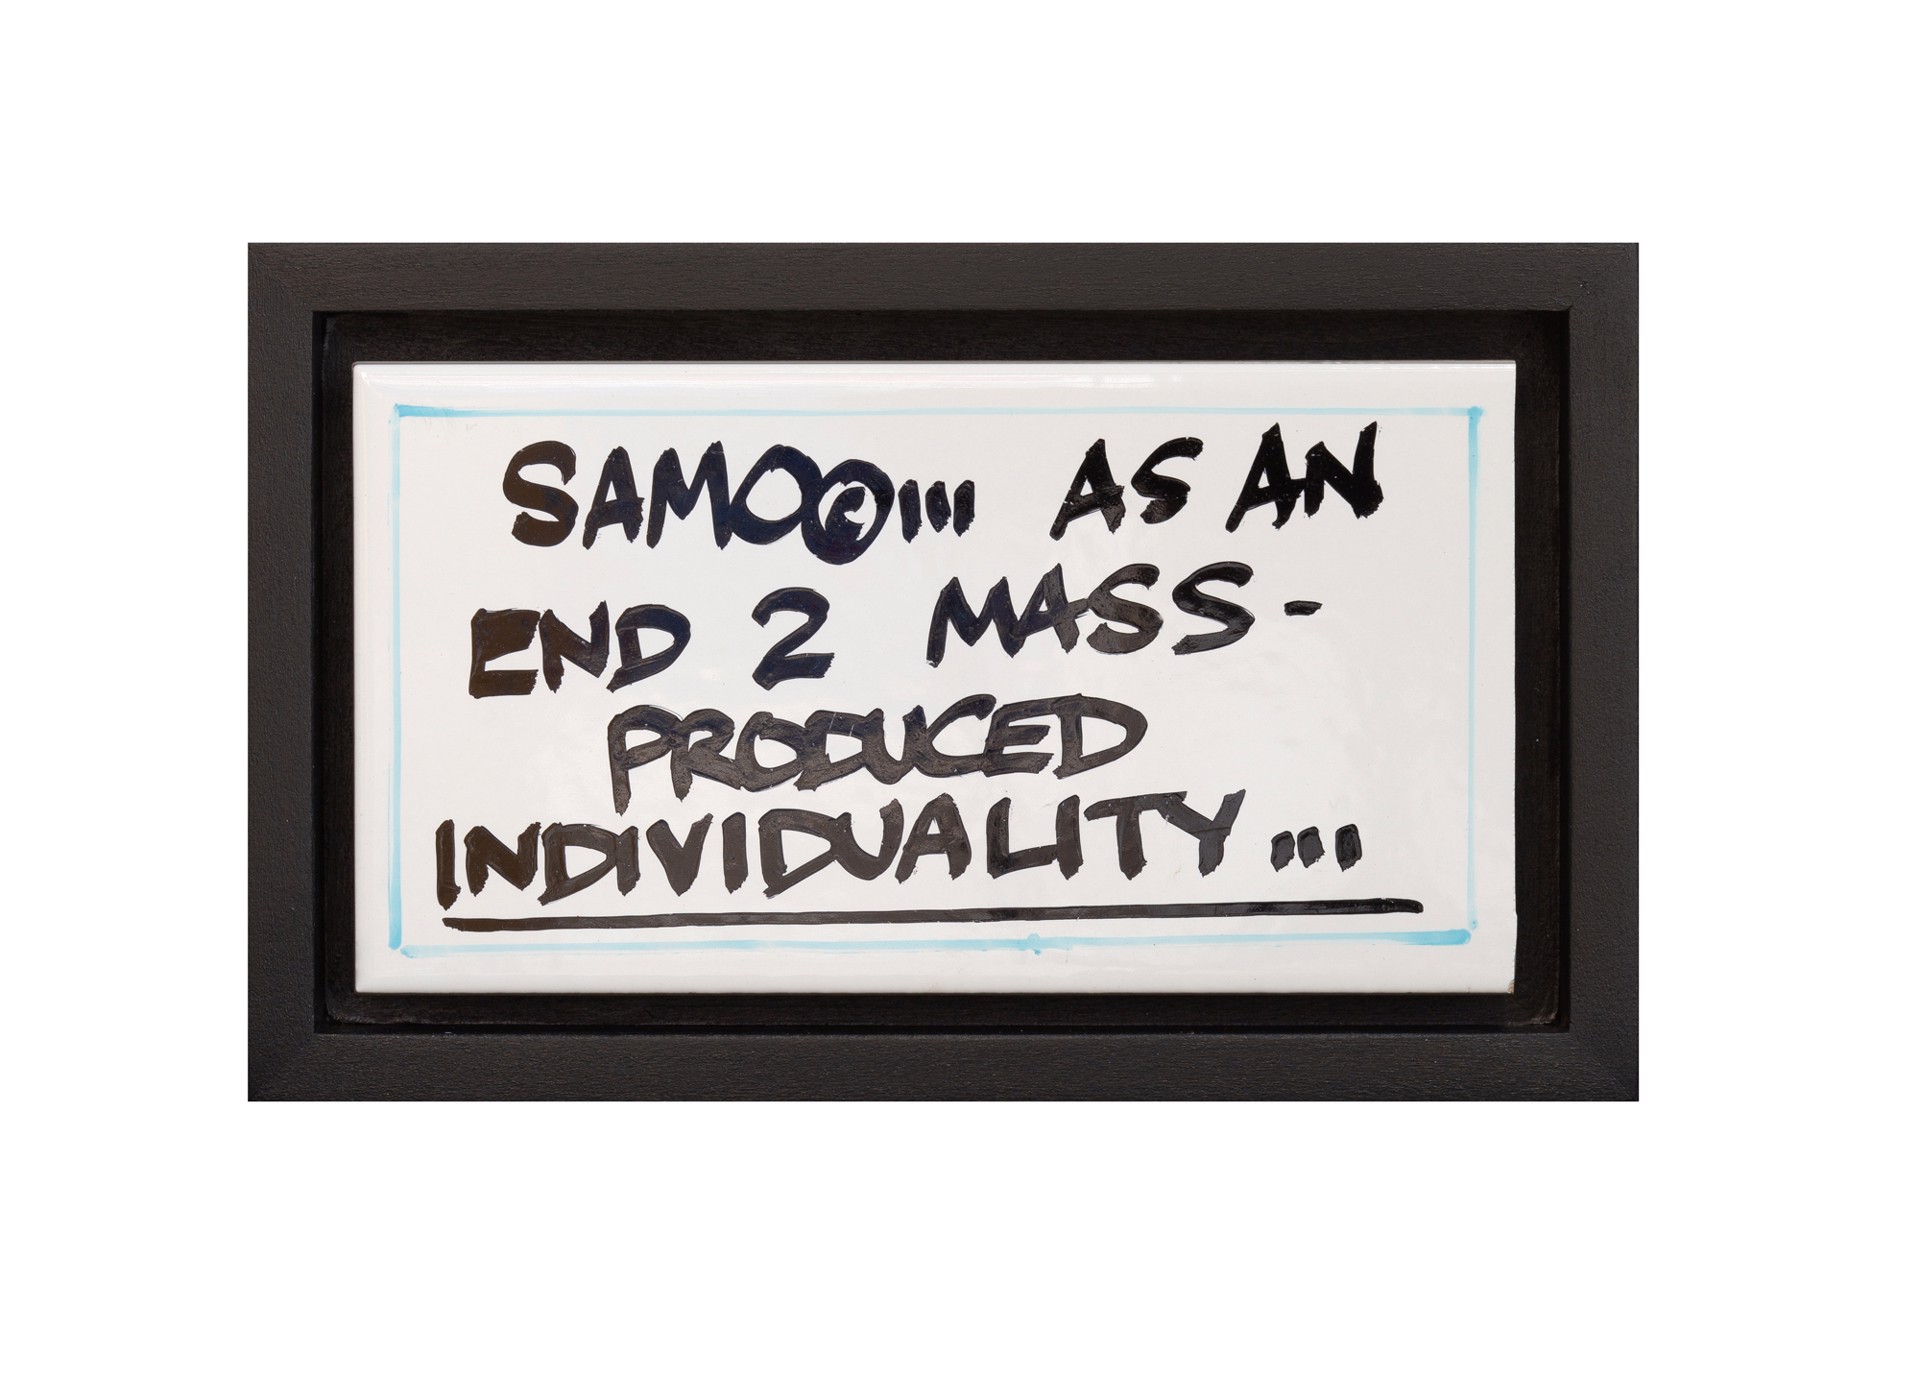 SAMO As the End of Mass Produced Individuality by Al Diaz